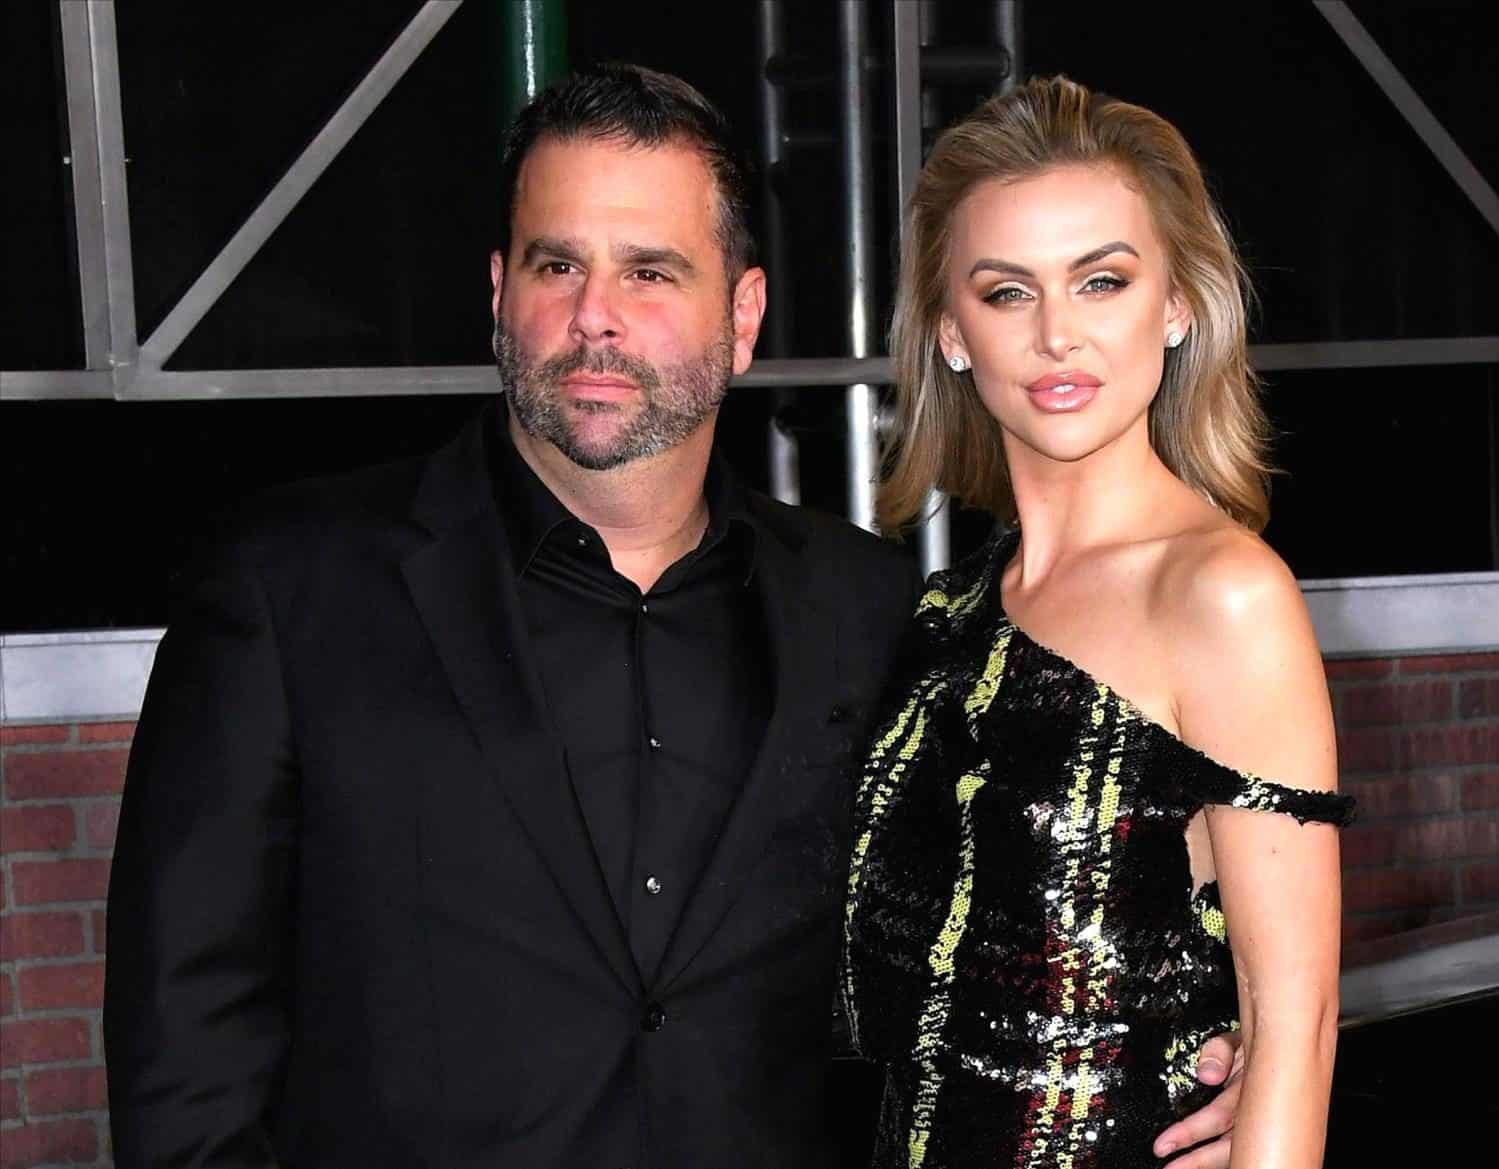 REPORT: Lala Kent Doesn't Trust Randall as He Puts on "Good Father" Act to Get Her Attention, Plus He "Vents" to Jax Taylor